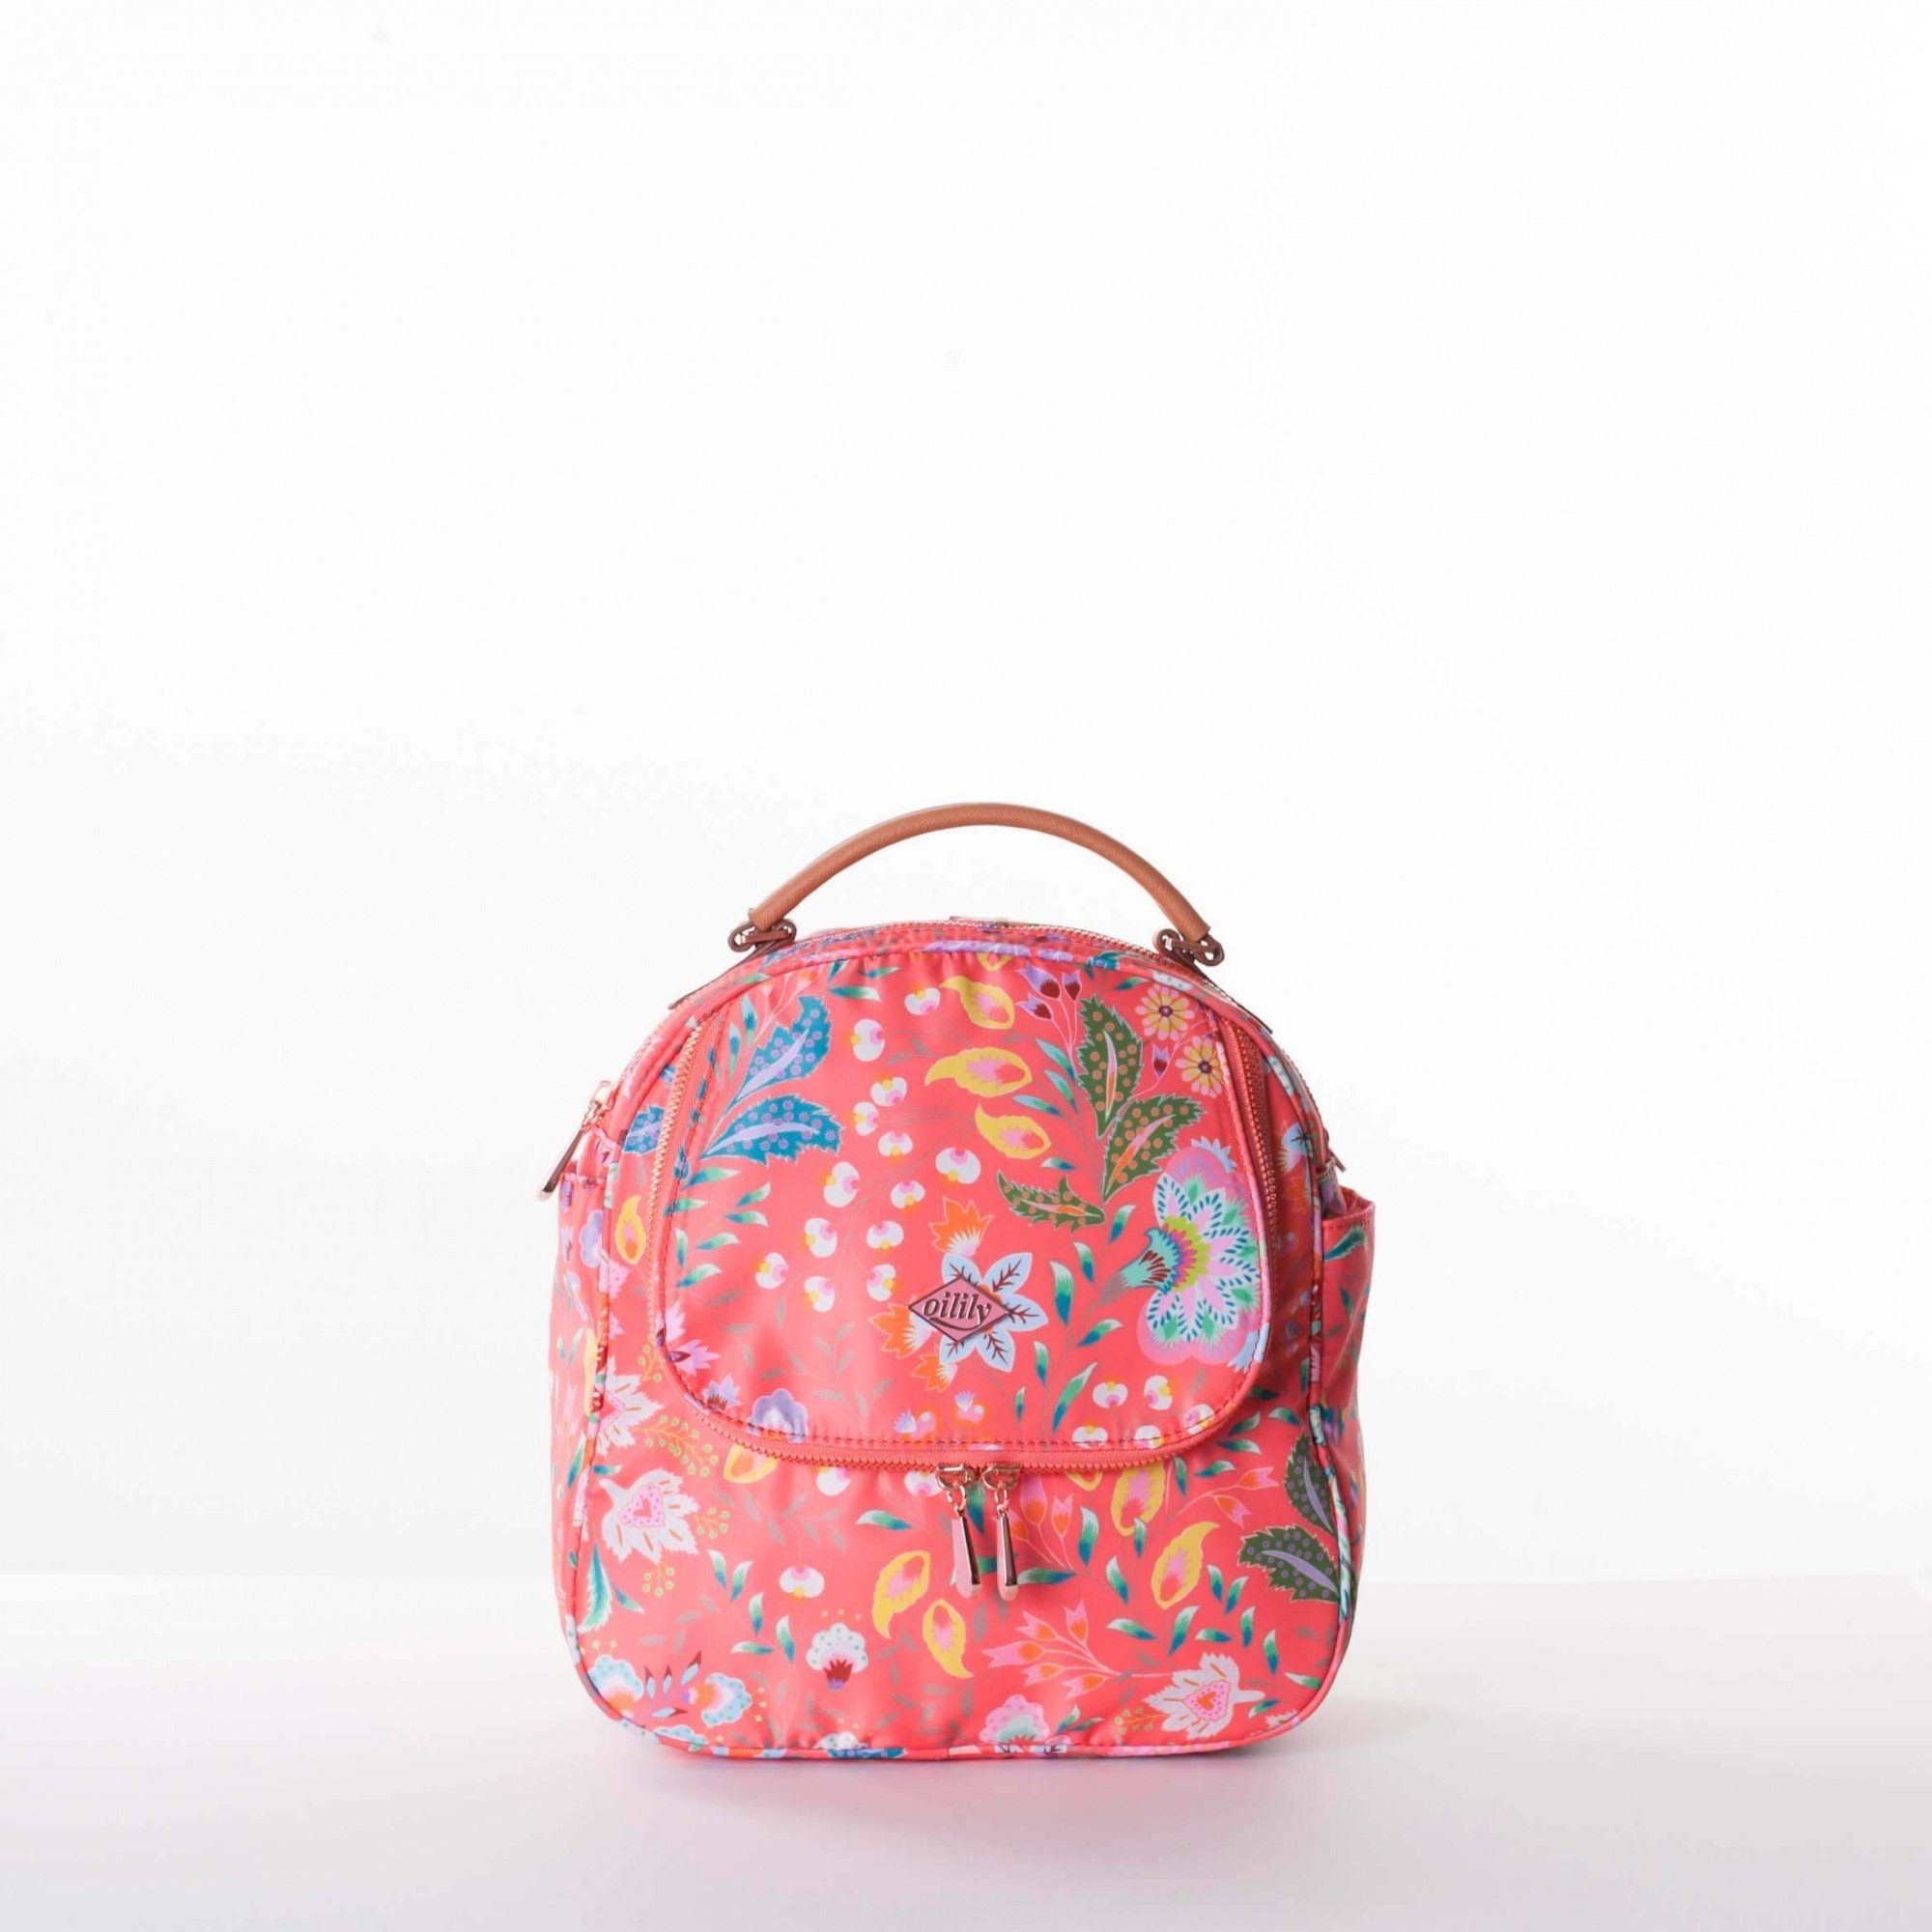 Coral Oilily Hot Schultertasche